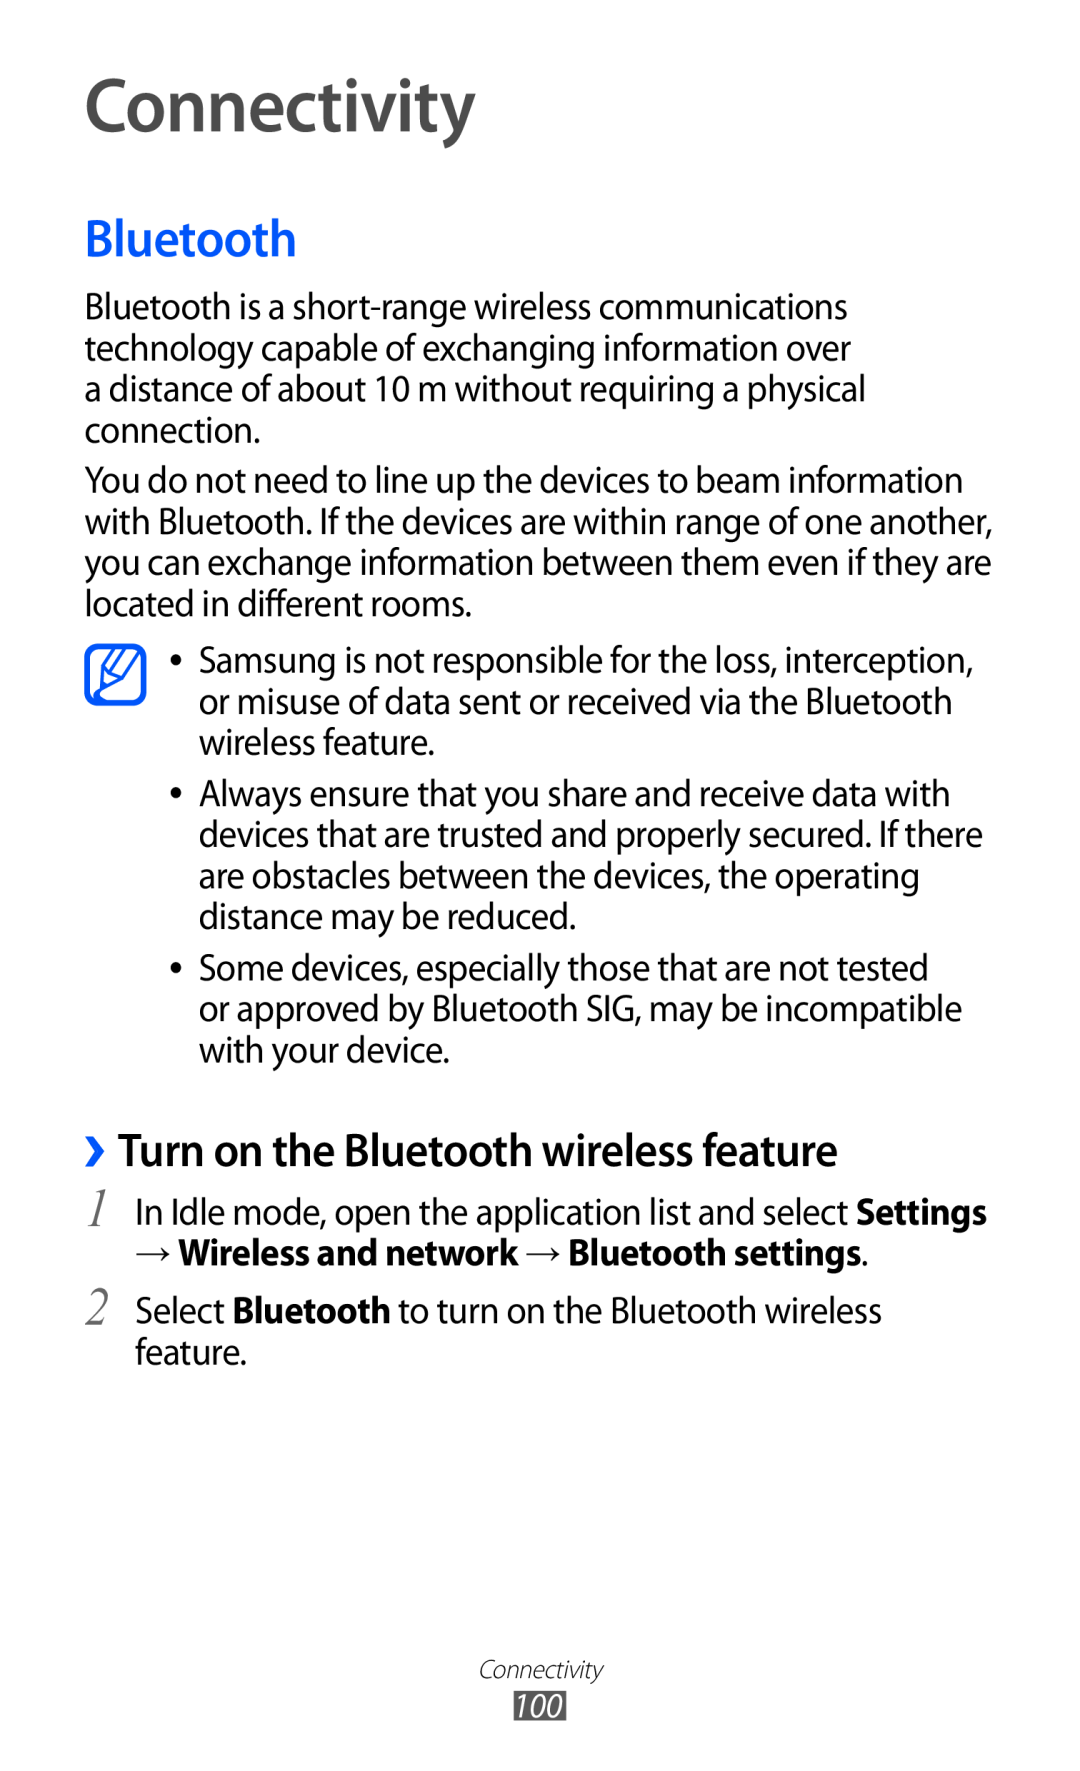 Samsung GT-I9070 Connectivity, ››Turn on the Bluetooth wireless feature, → Wireless and network → Bluetooth settings 